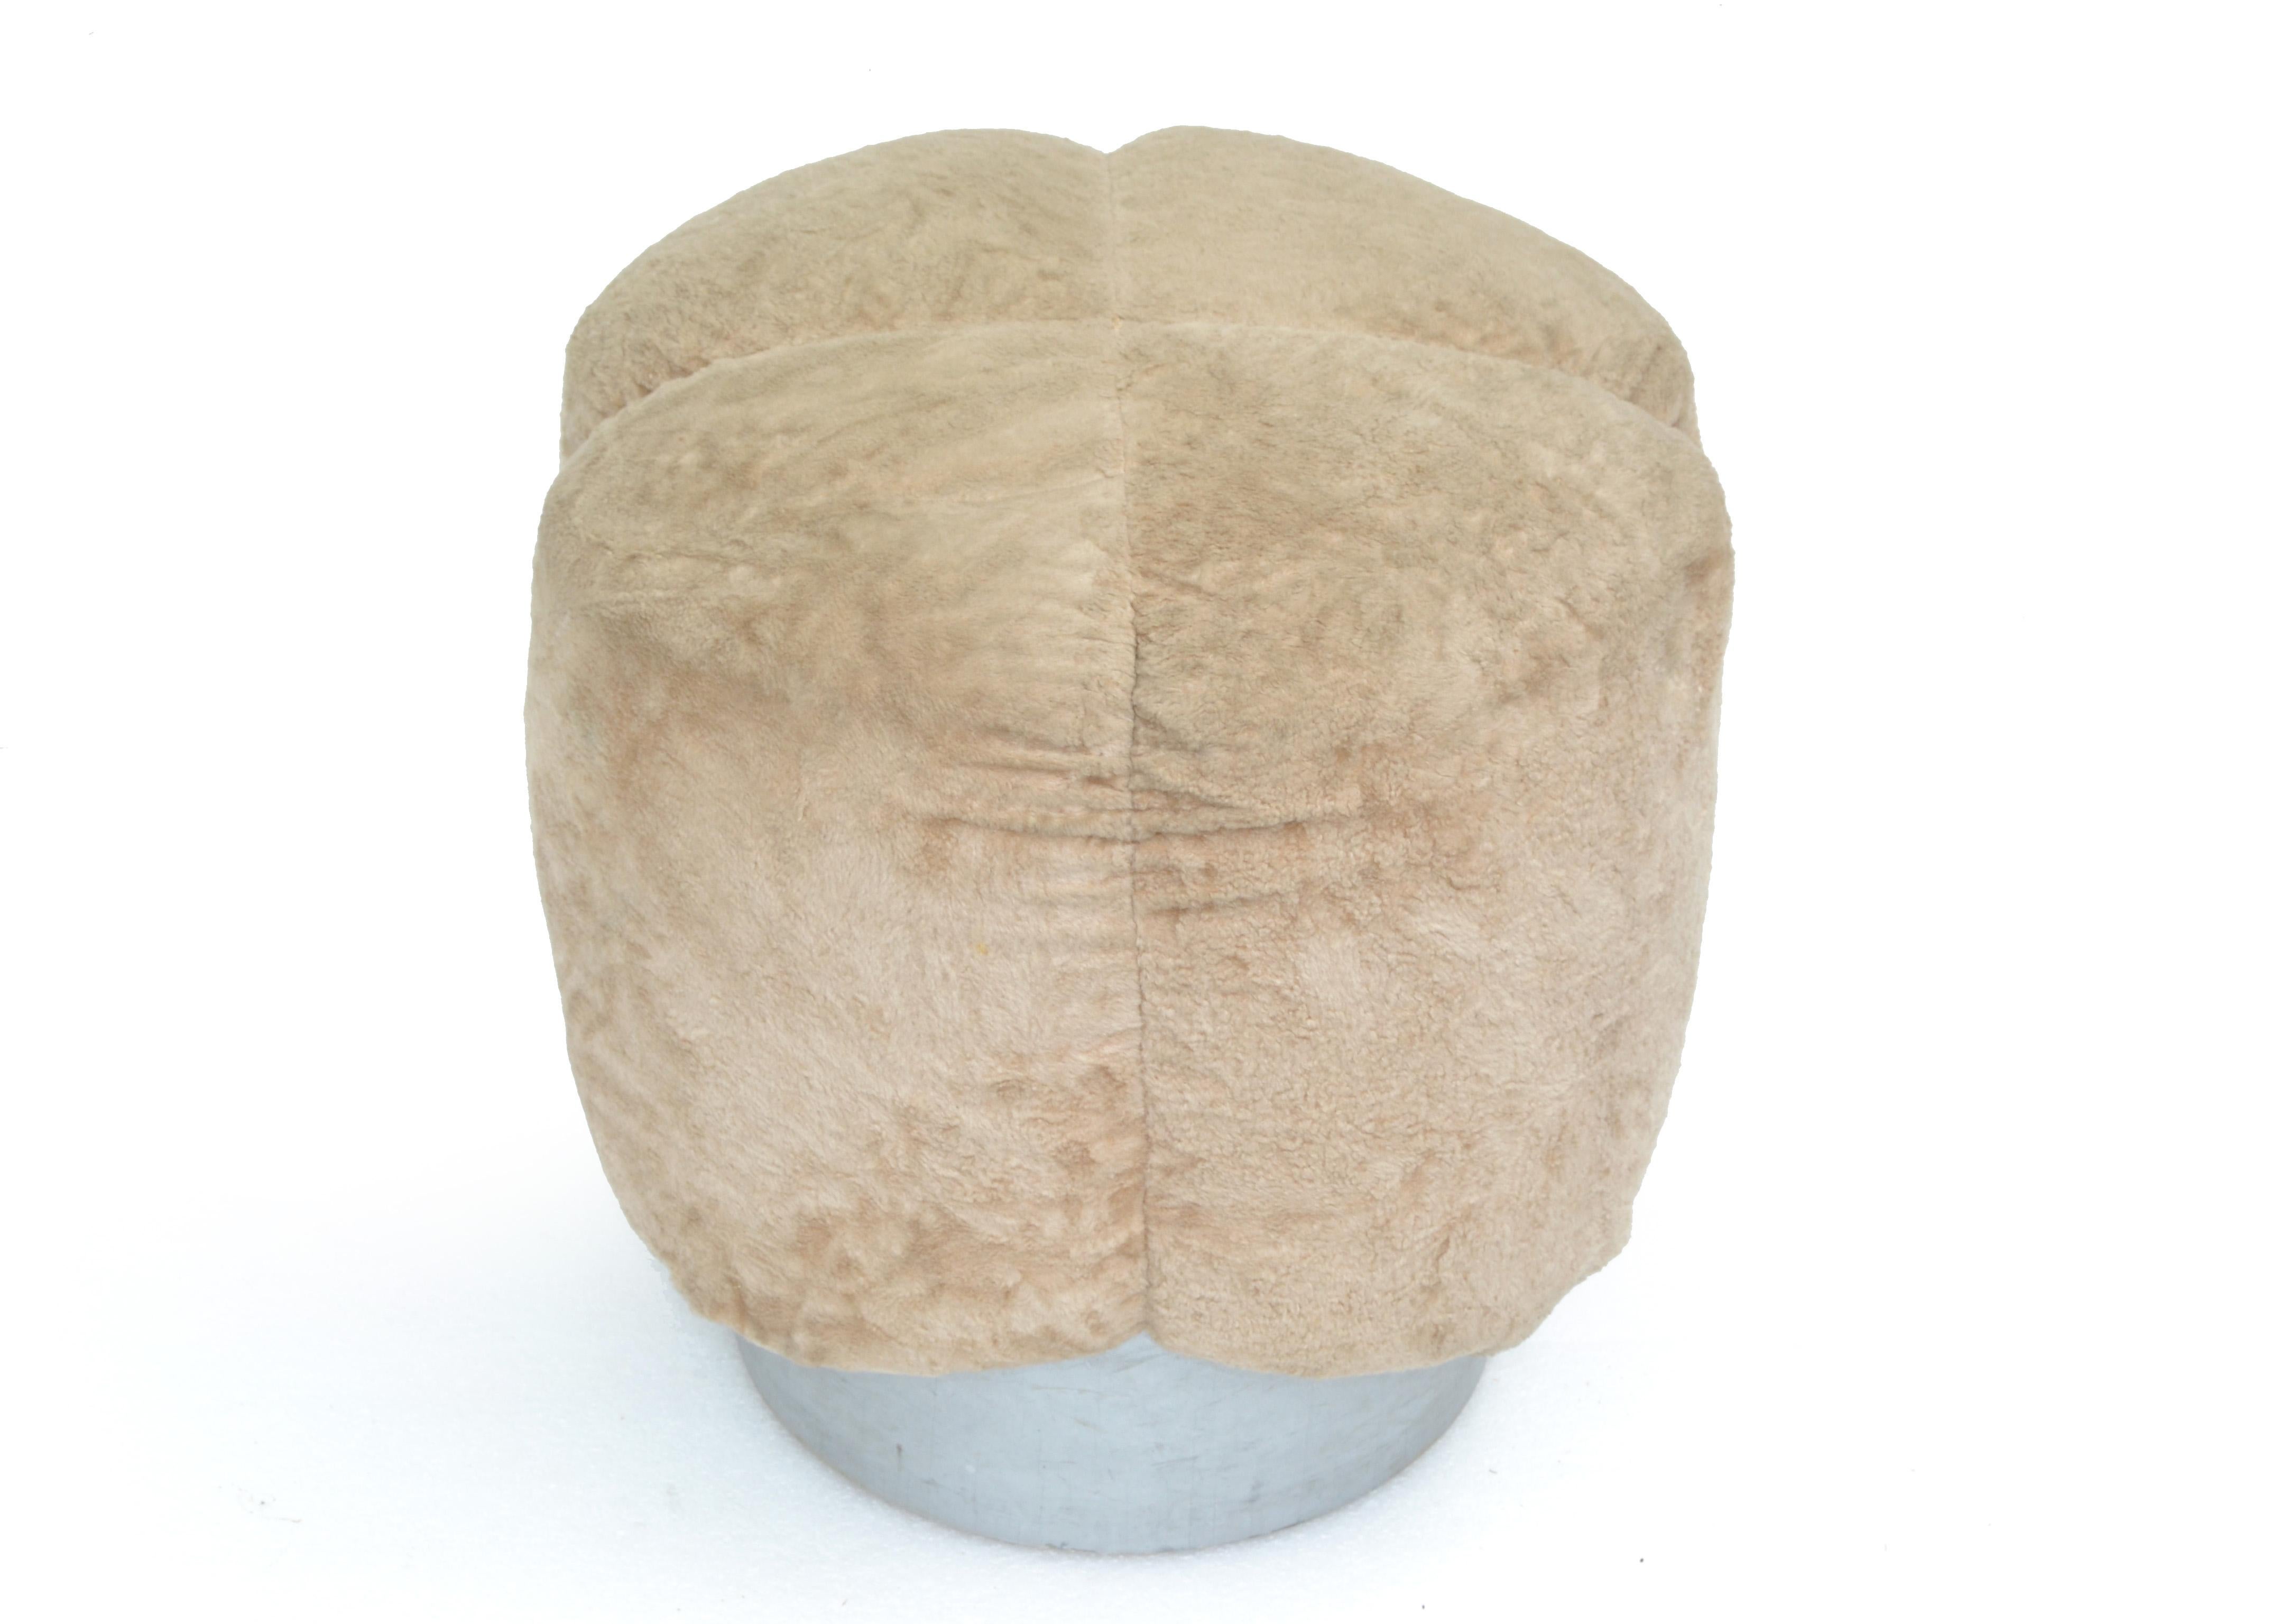 Pierre Cardin style Mid-Century Modern round stool, ottoman or Pouf in the Space Age Design.
Round wood base in silver finish and with Teddy Plush upholstery.
In all good vintage condition and we recommend to have it restored.
Top diameter